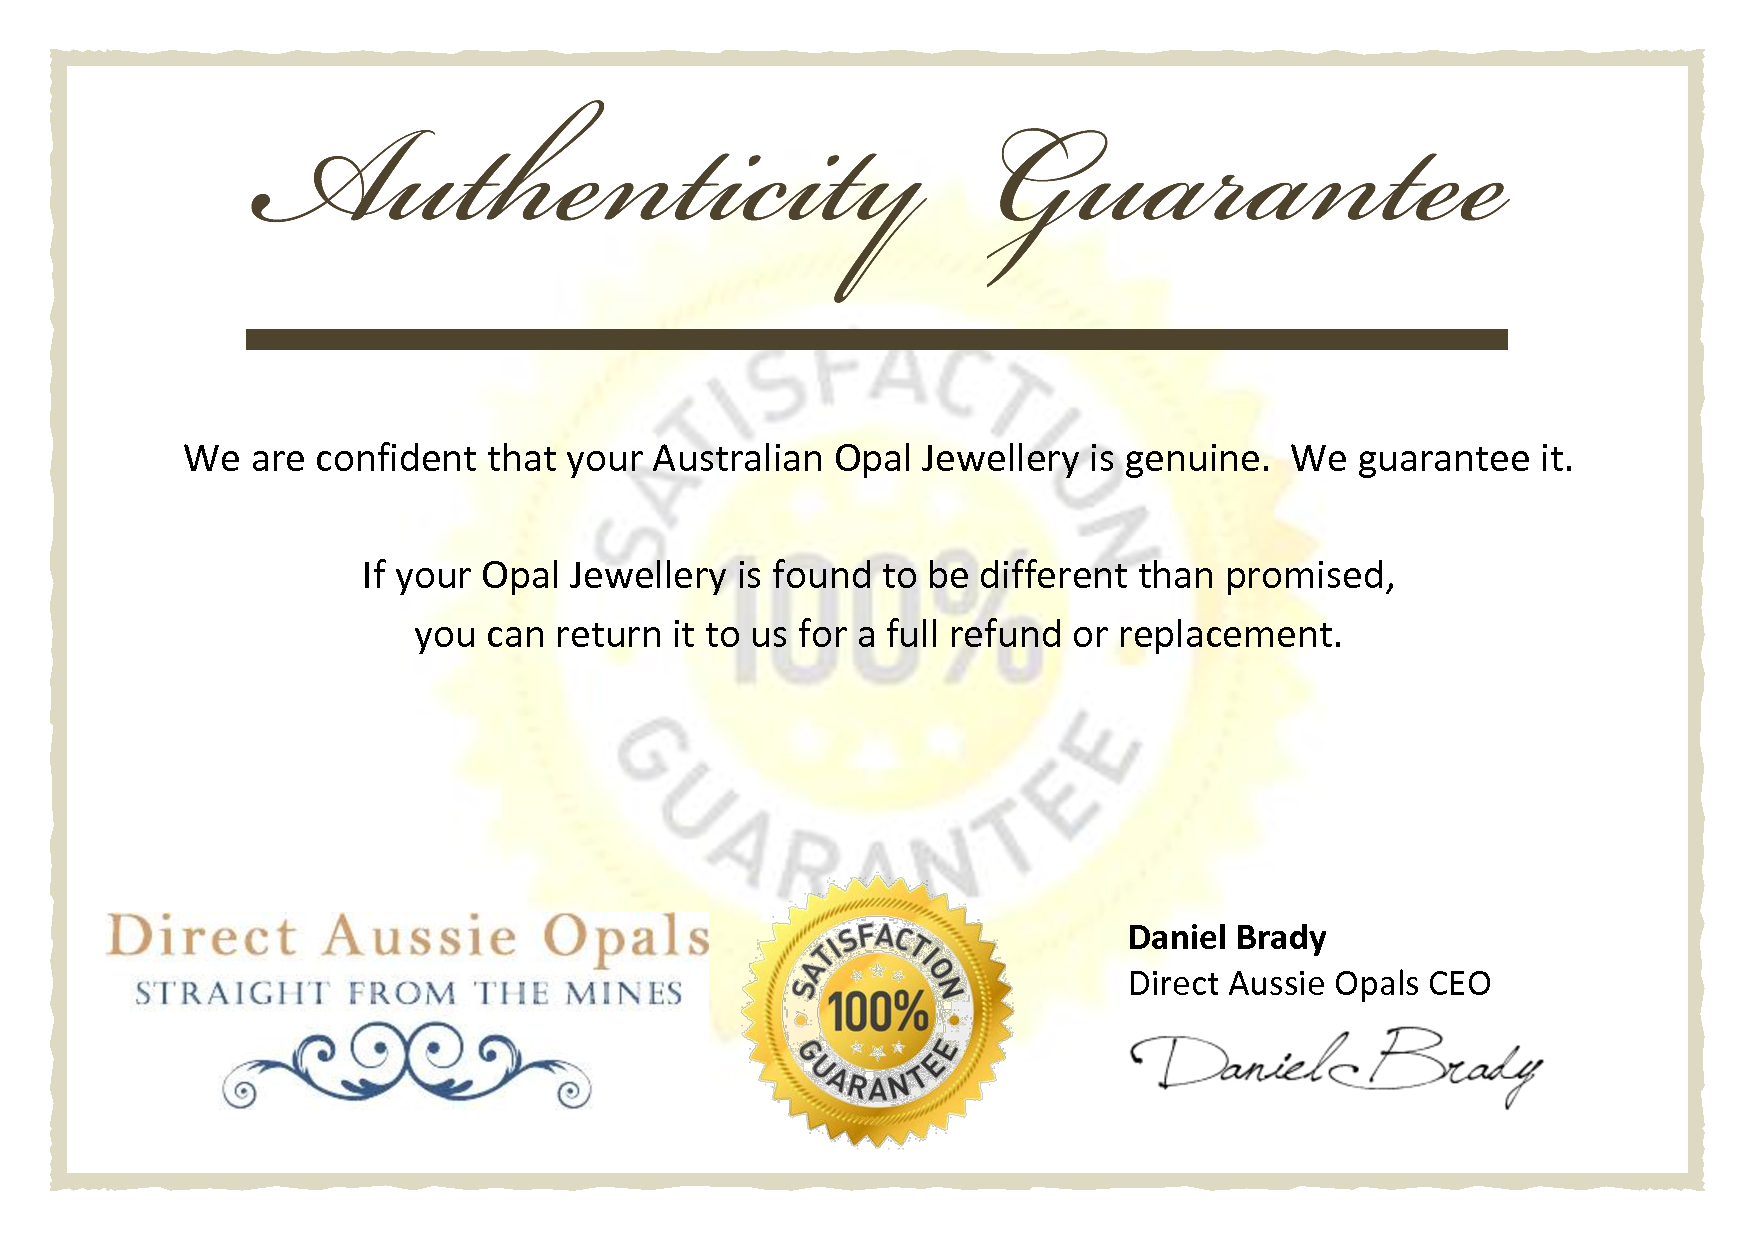 Certificate Of Authenticity Template Psd Word Artist Free With Certificate Of Authenticity Template